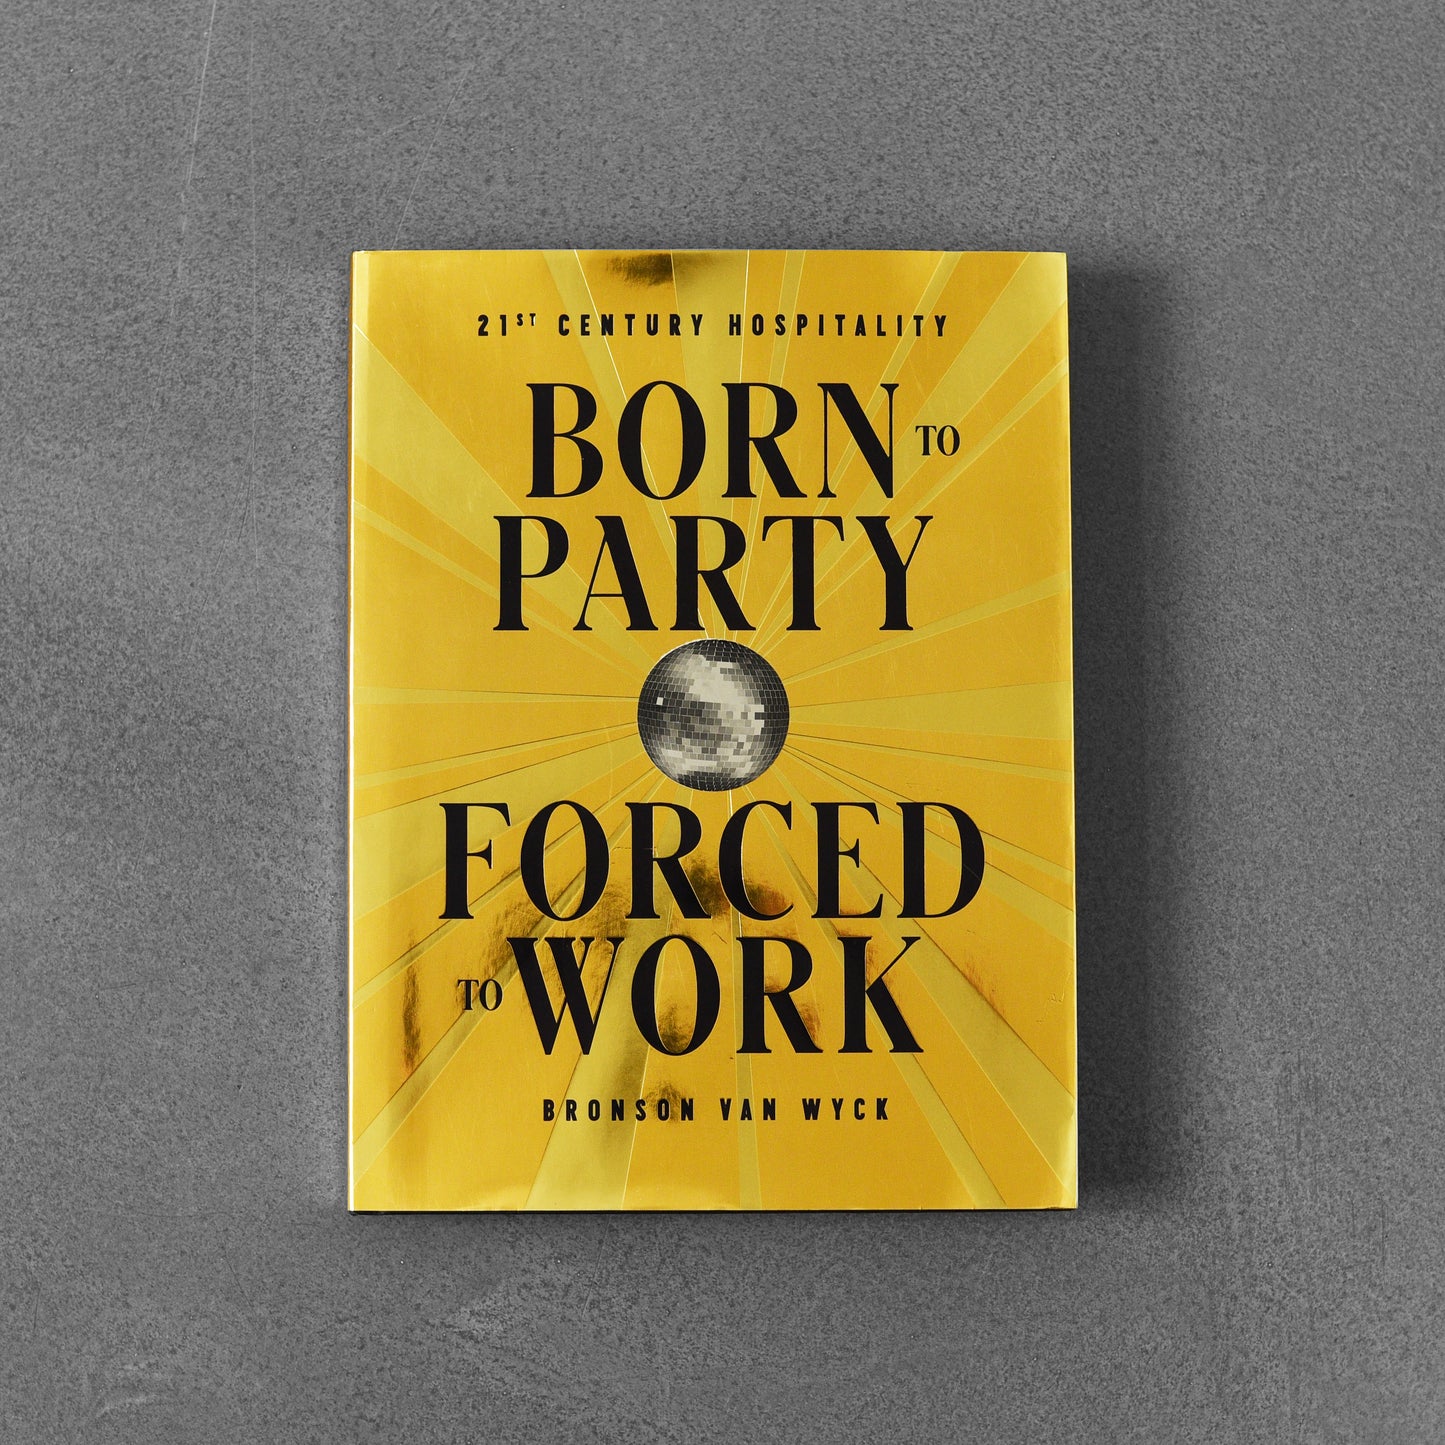 Born to Party Forced to Work - Bronson van Wyck